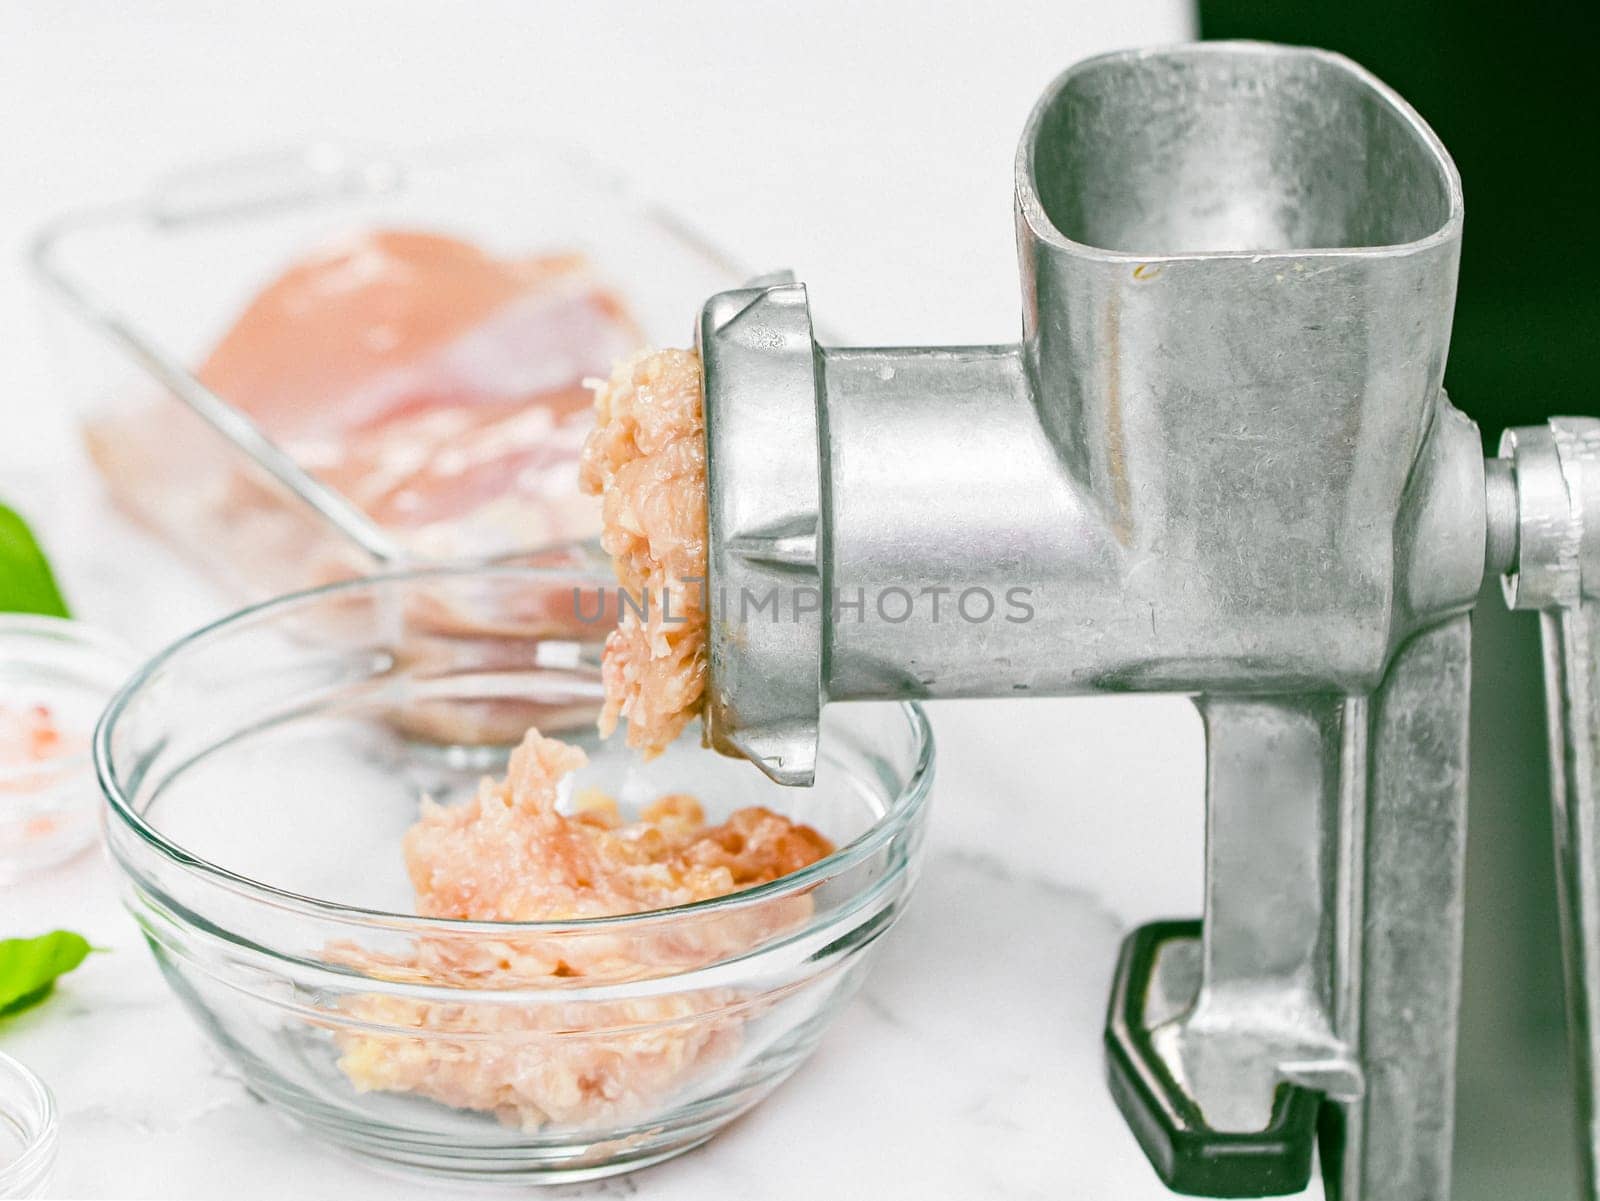 Manual retro meat grinder with minced meat in a glass bowl with boneless chicken thighs and basil leaves on a marble table, close-up side view. The concept of home cooking and healthy eating.